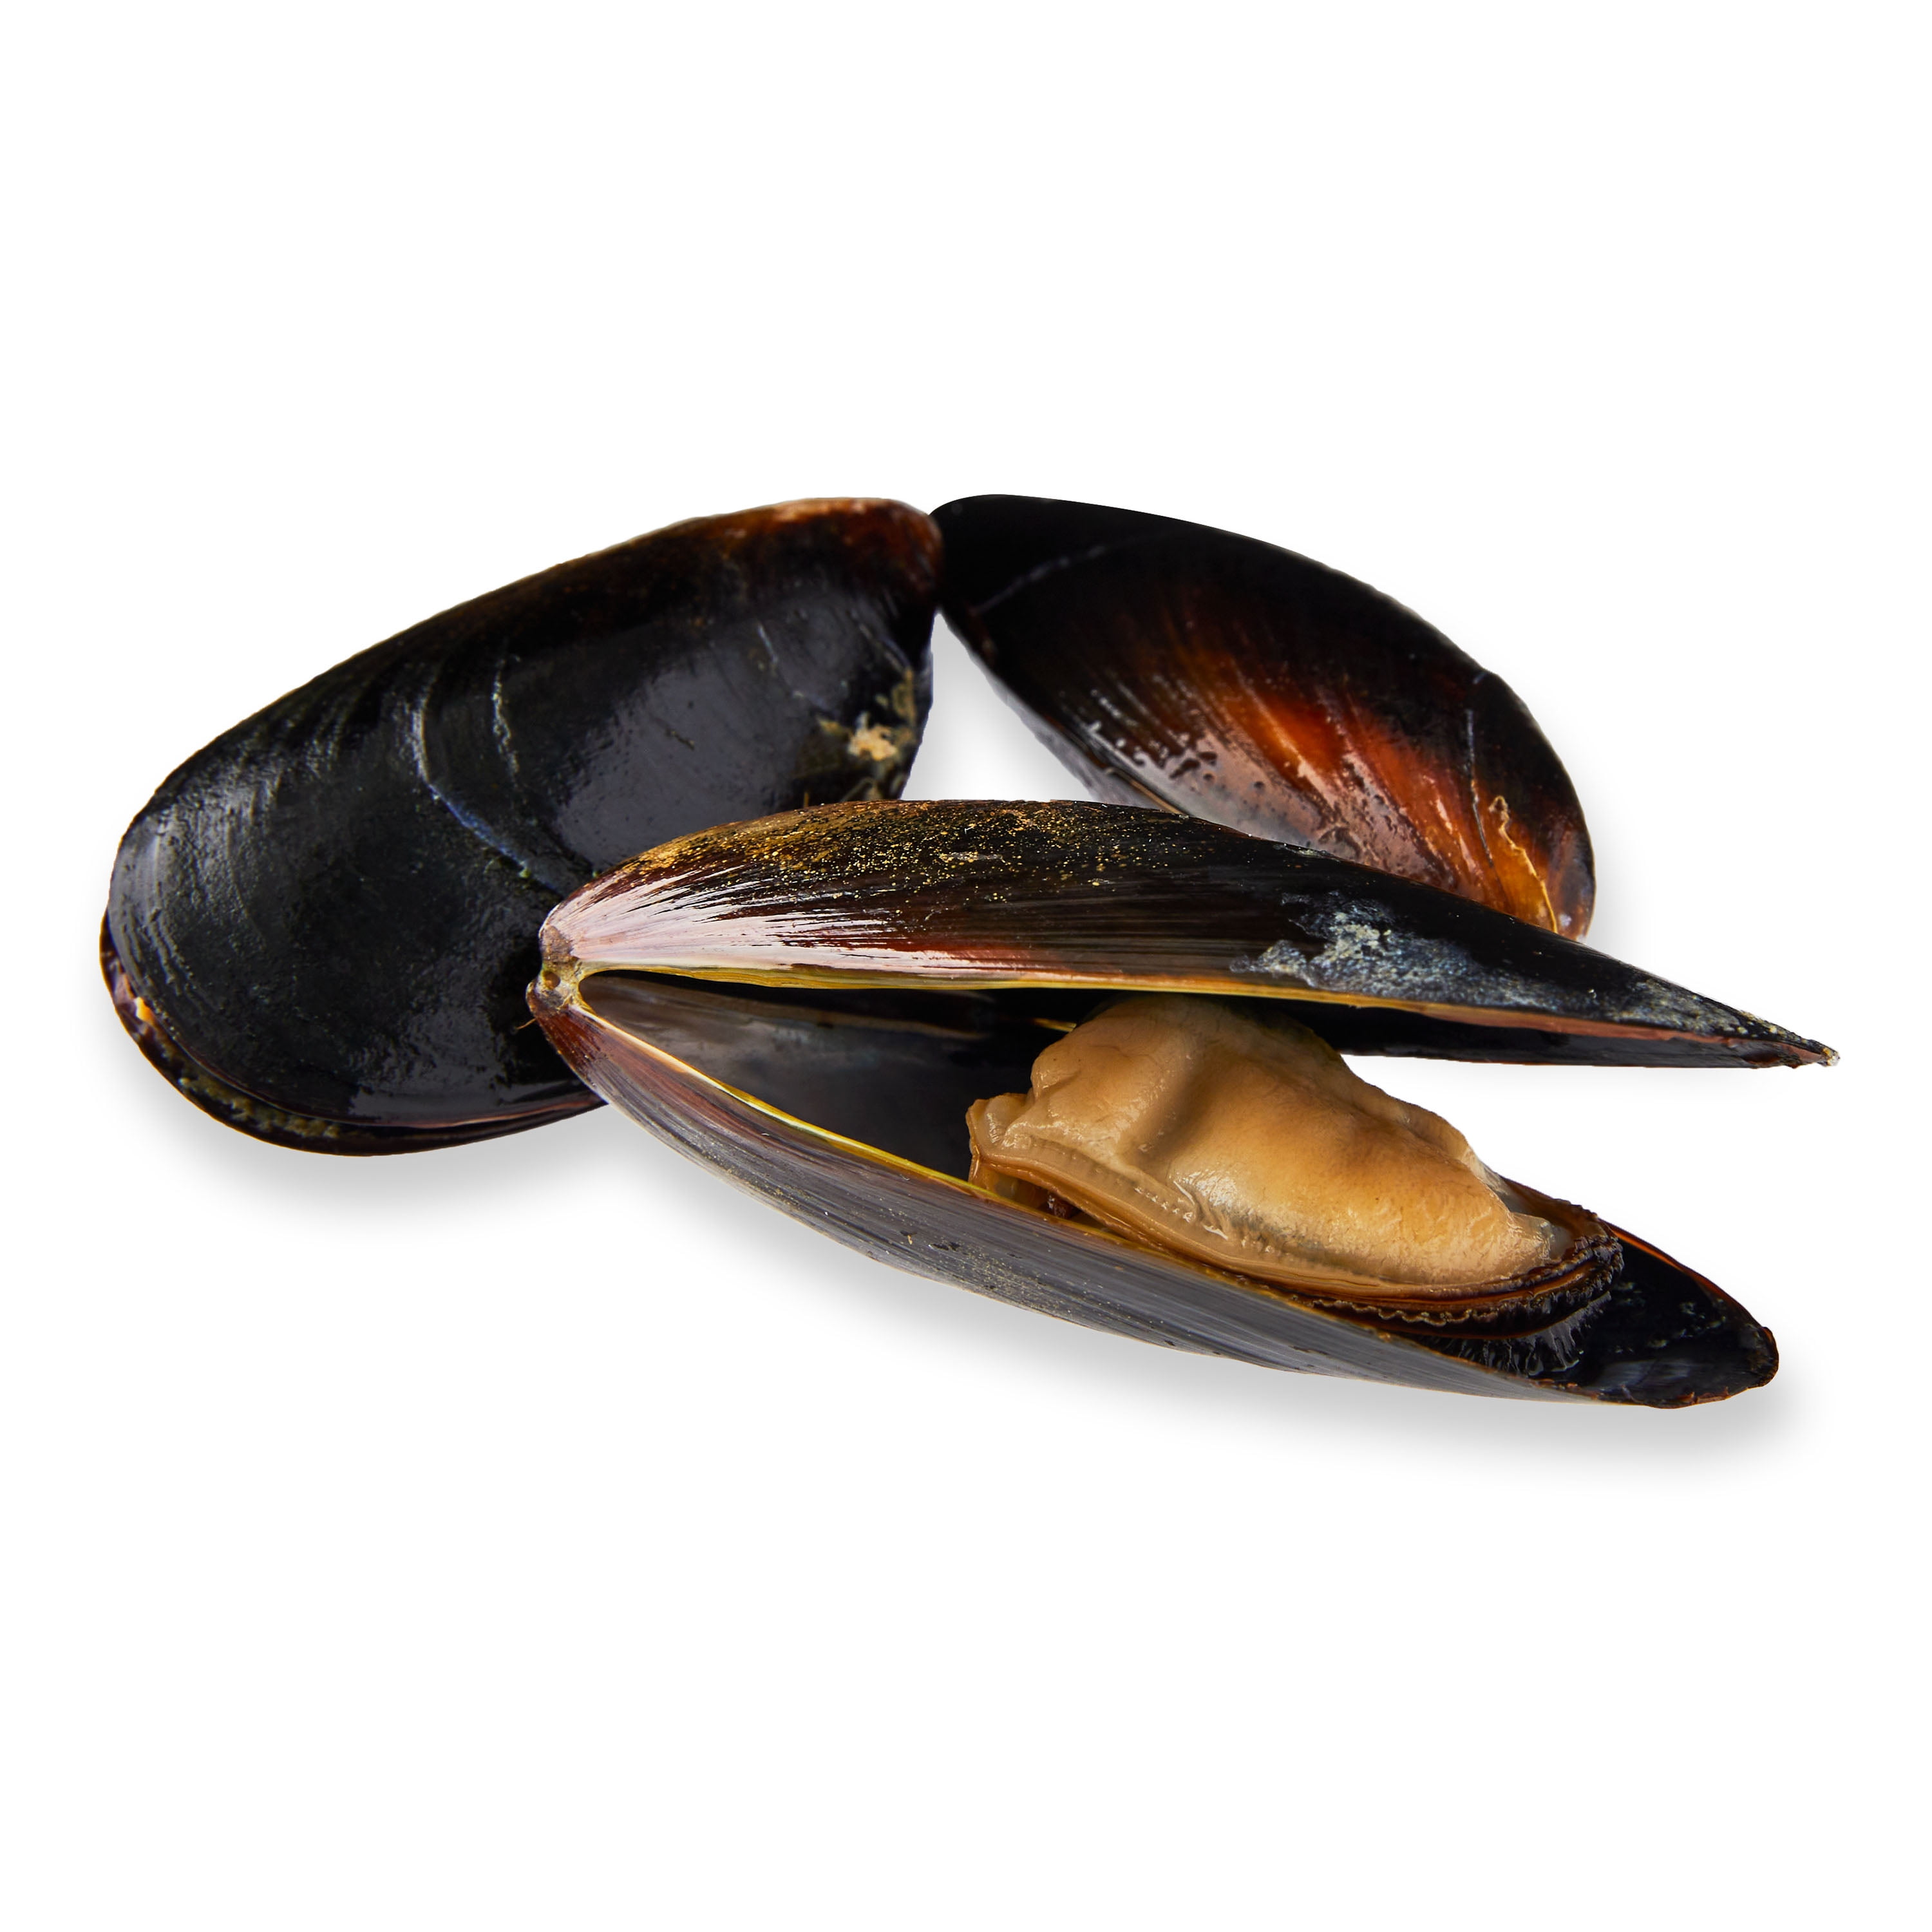 Ripples to exile cushion Sam's Choice Frozen Fully Cooked Mussels, 32 oz - Walmart.com